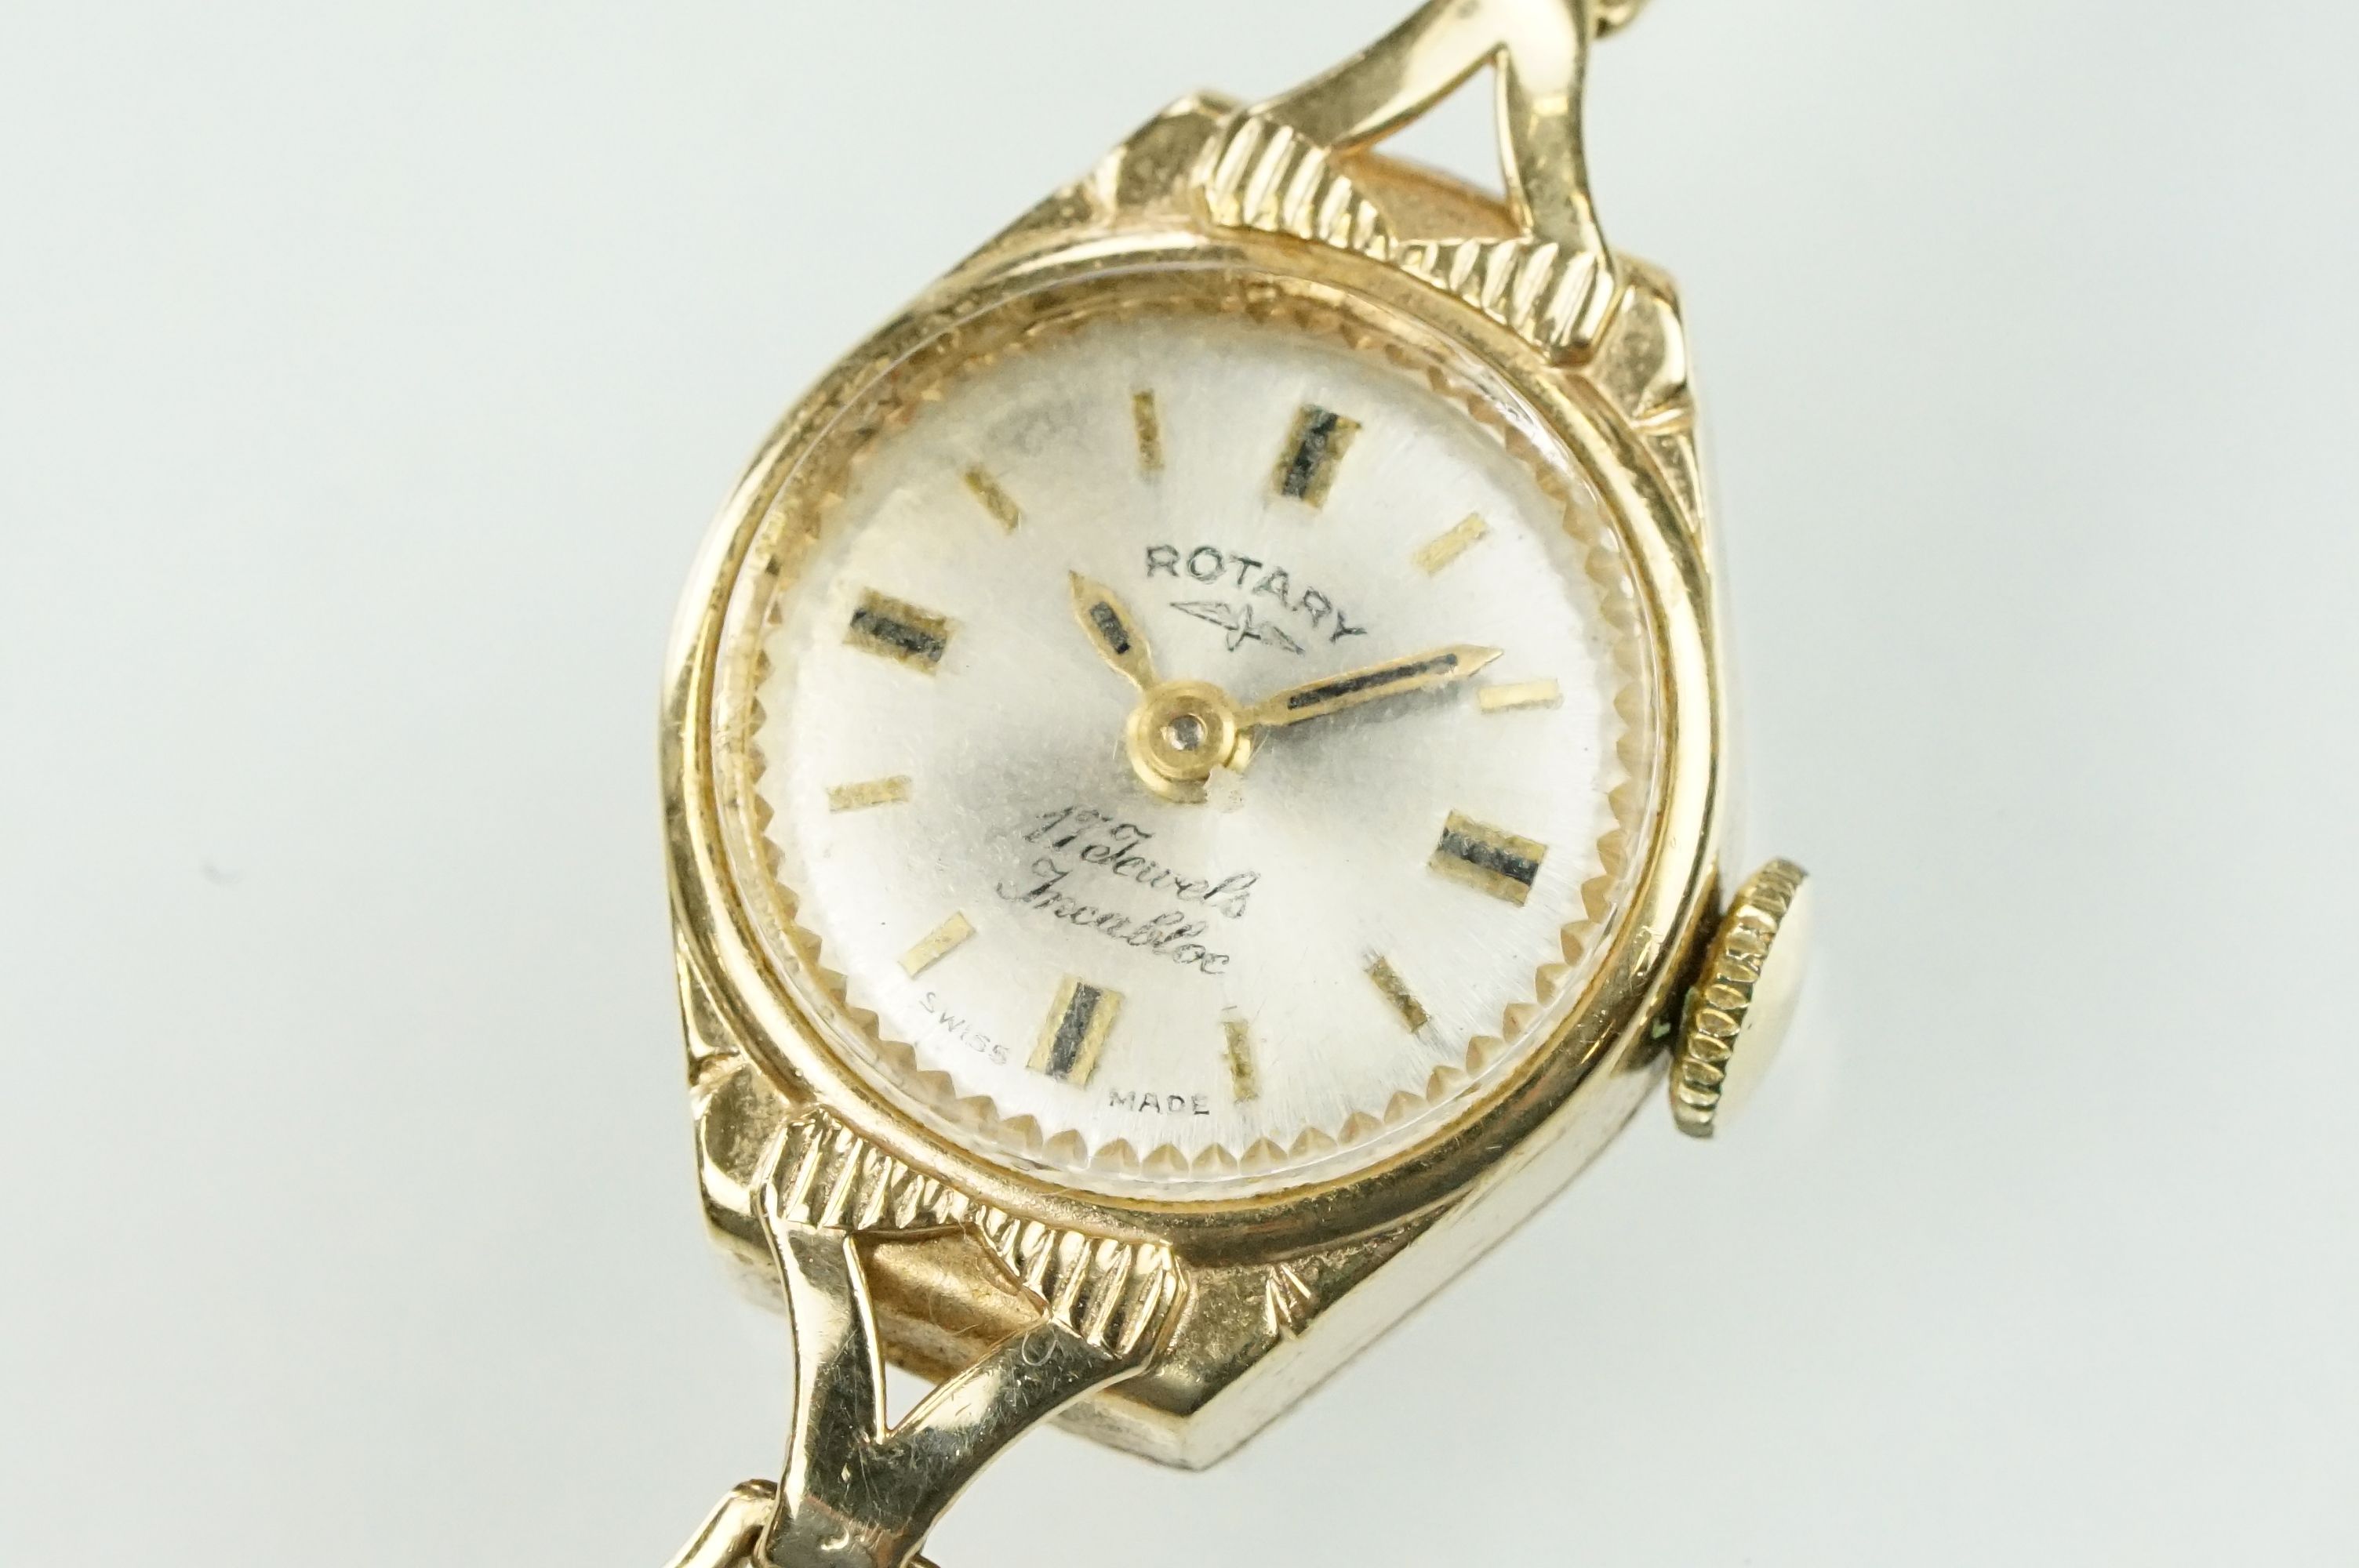 Rotary 9ct gold ladies wrist watch having a round face with baton markings to the chapter ring - Image 2 of 11